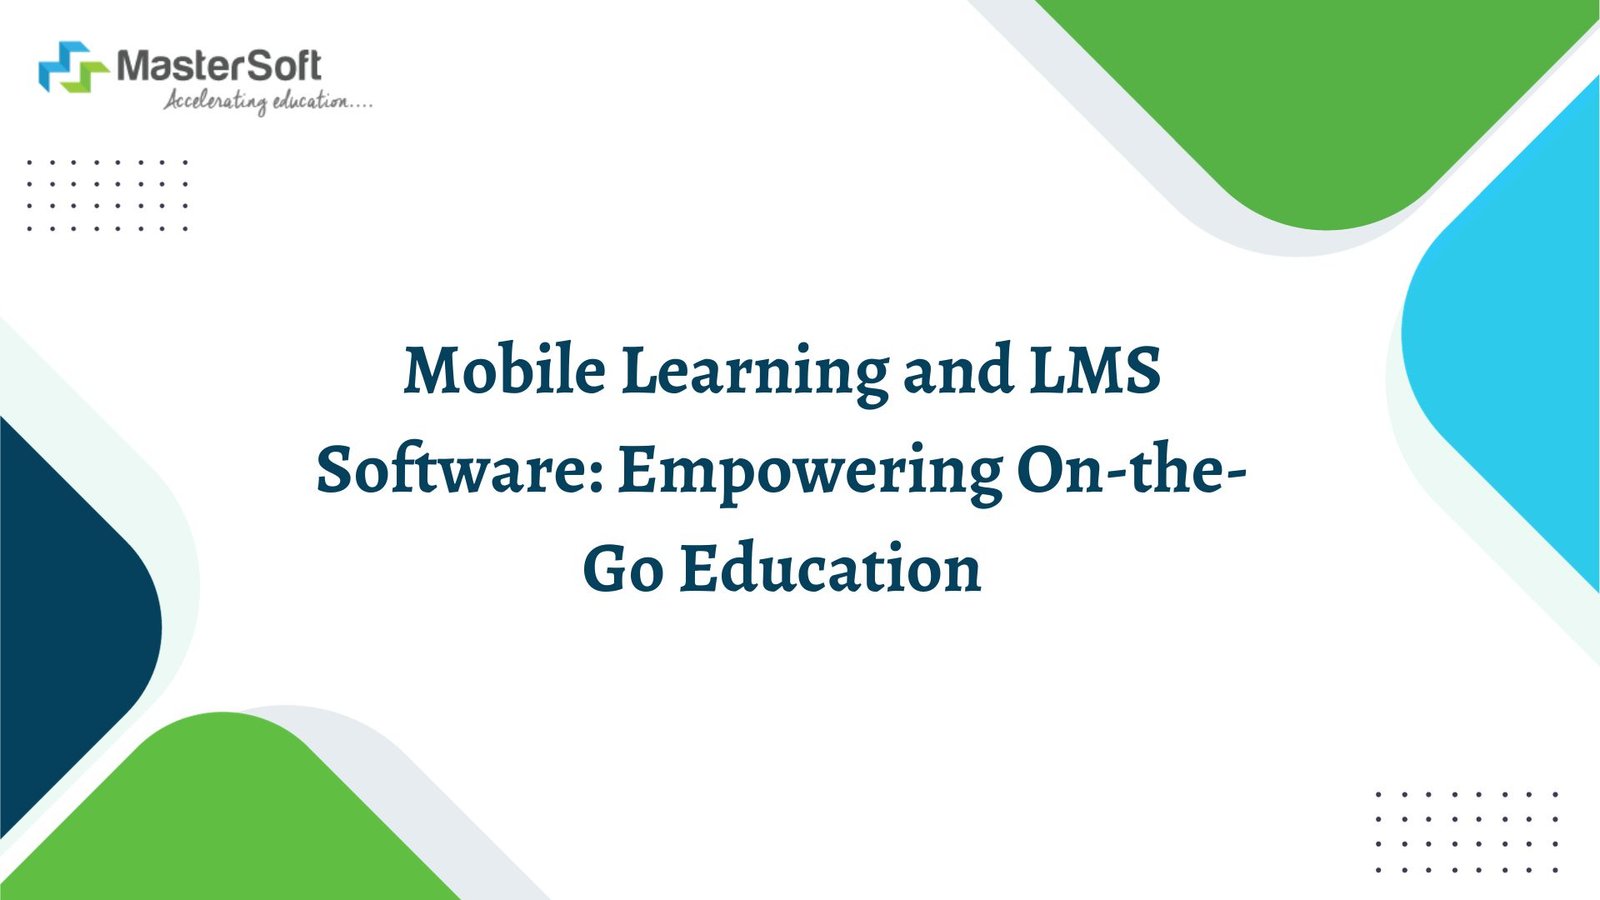 Mobile Learning and LMS Software